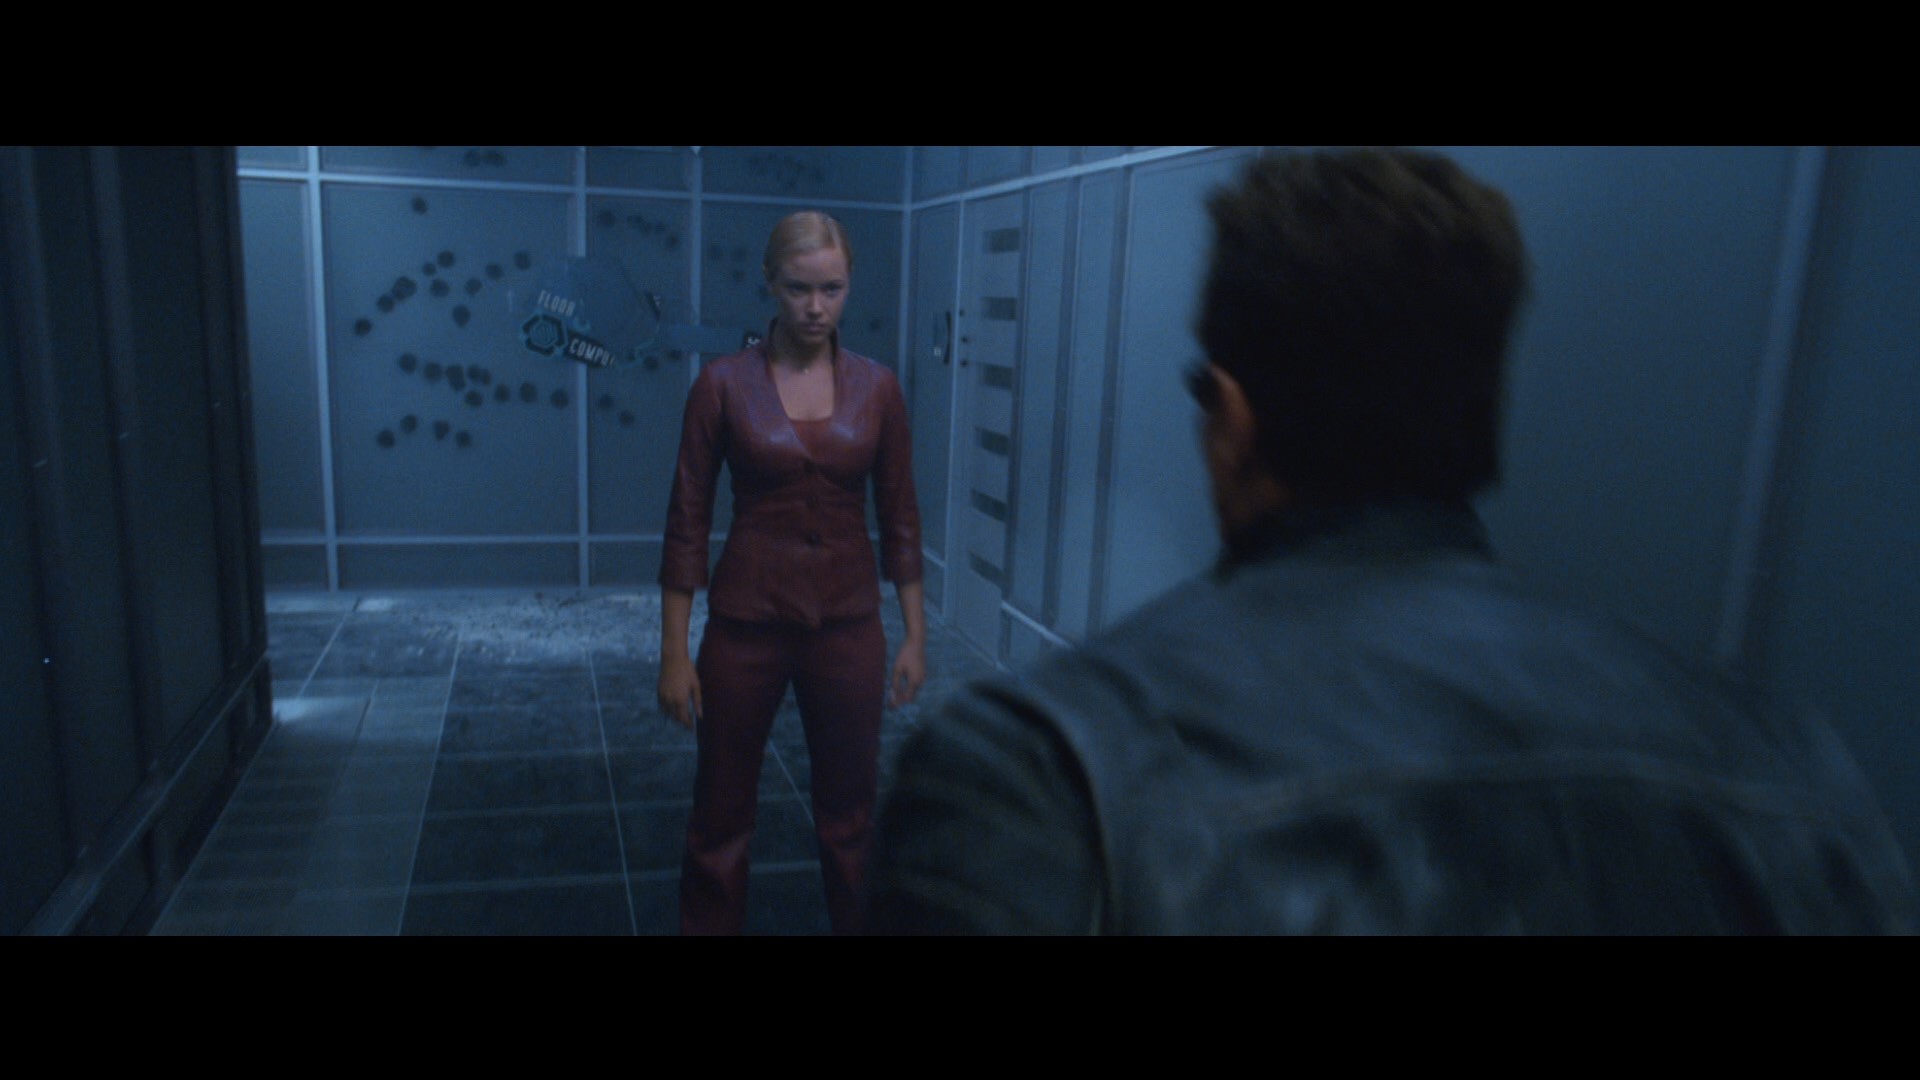 TERMINATOR 3: RISE OF THE MACHINES (2003) - TX's (Kristanna Loken) Costume with Light-Up Display - Image 8 of 8